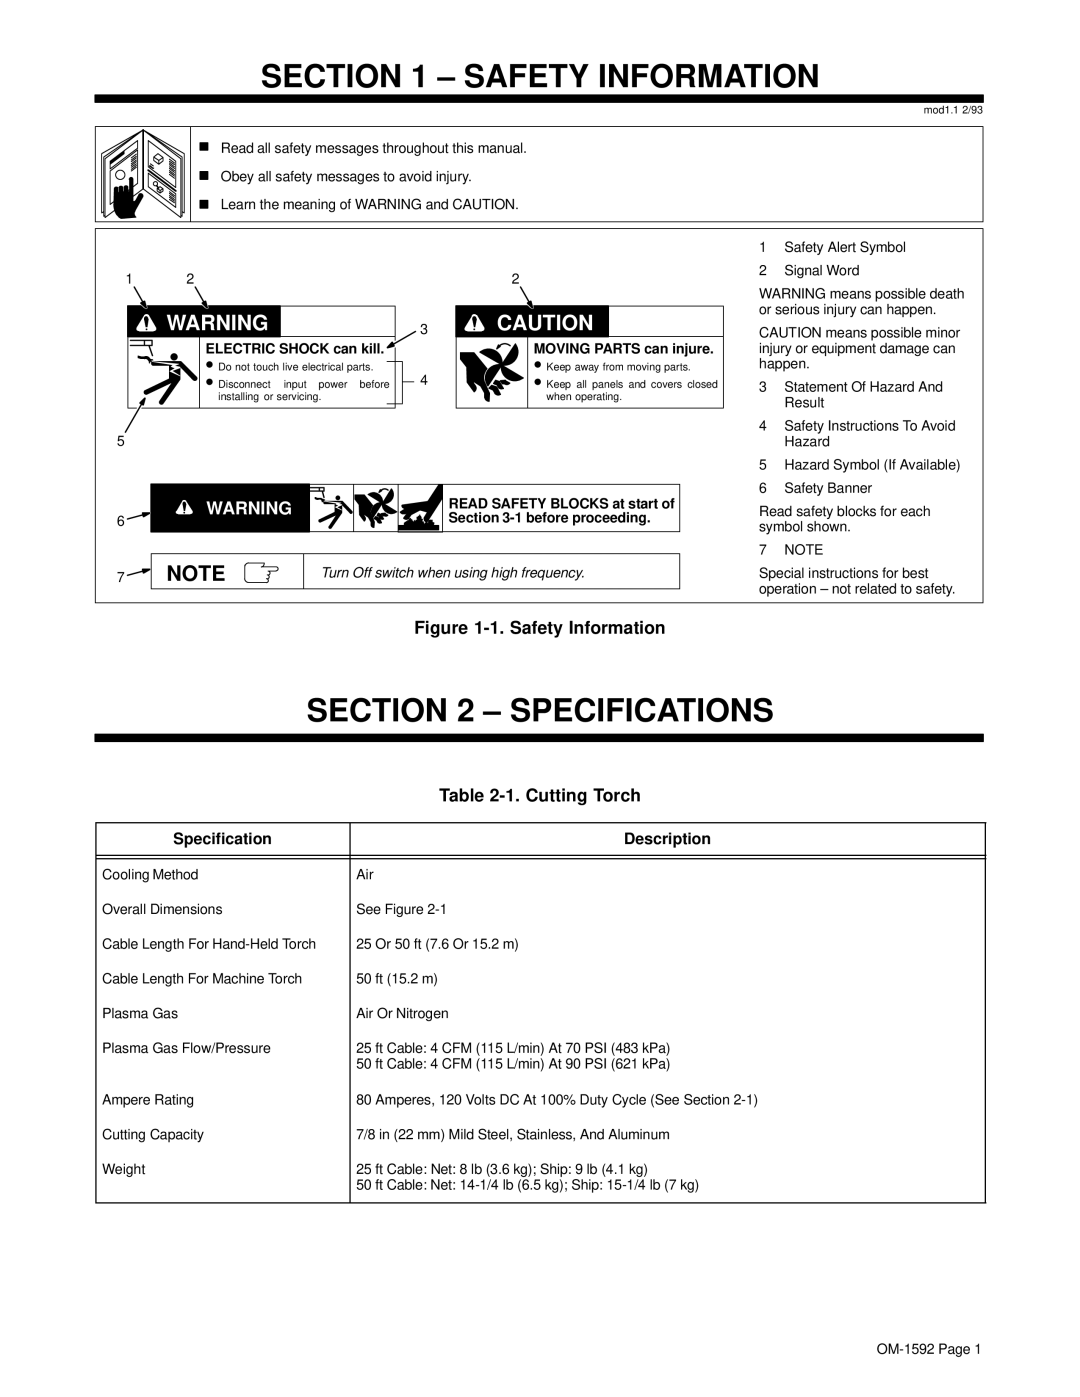 Miller Electric MC-80M owner manual Safety Information, Specifications, Cutting Torch 